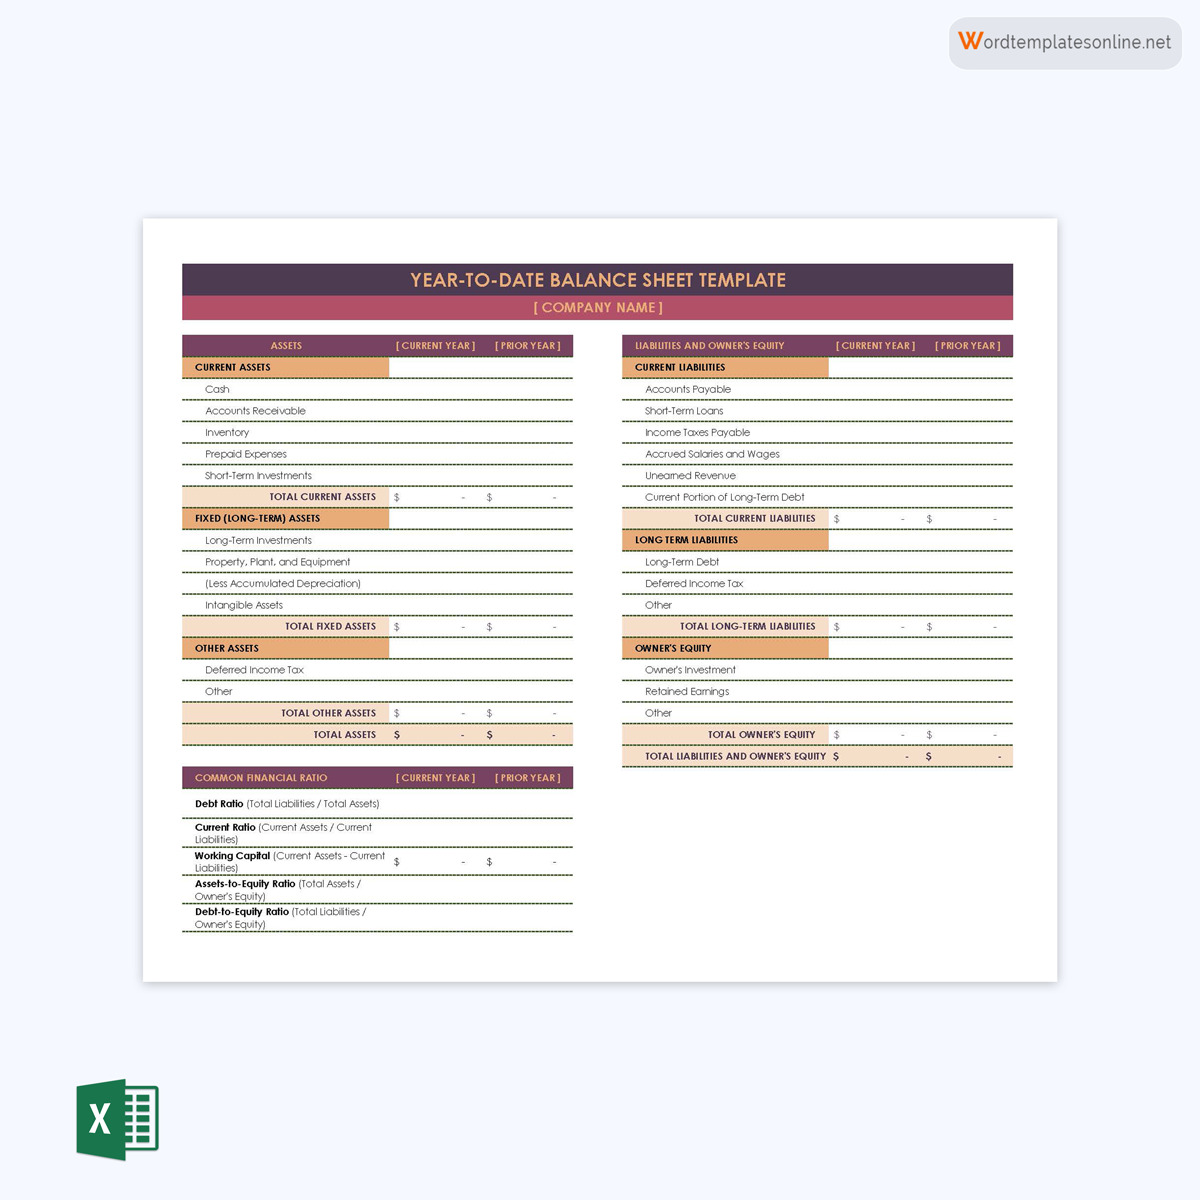 Free Editable Year to Date Balance Sheet Template 01 in Excel Format